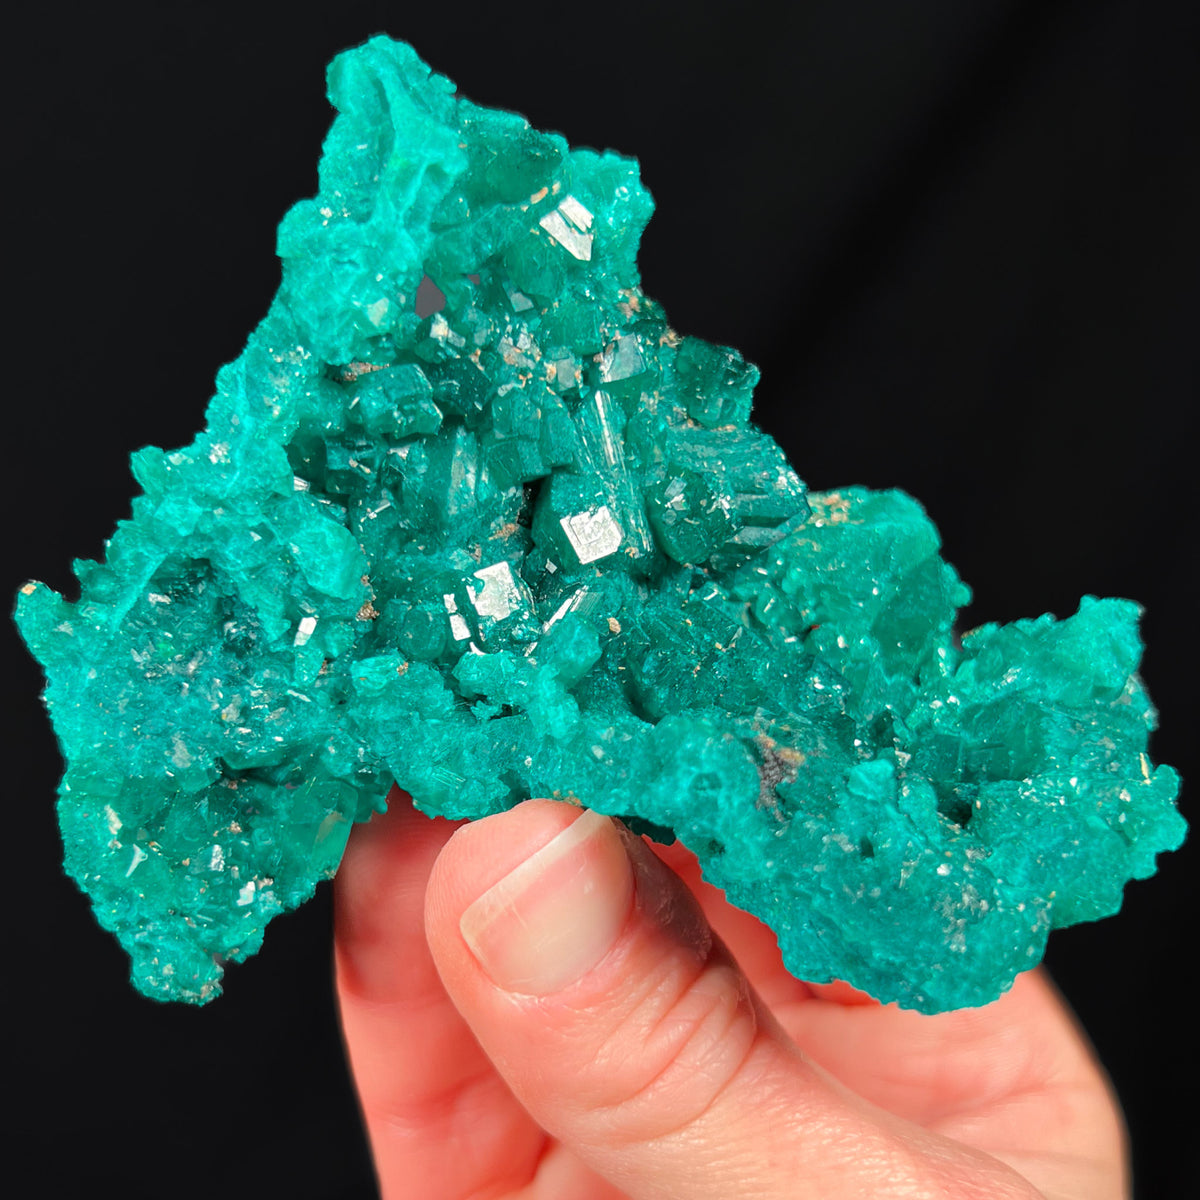 Large Crystal Cluster of Dioptase from the Democratic Republic of Congo